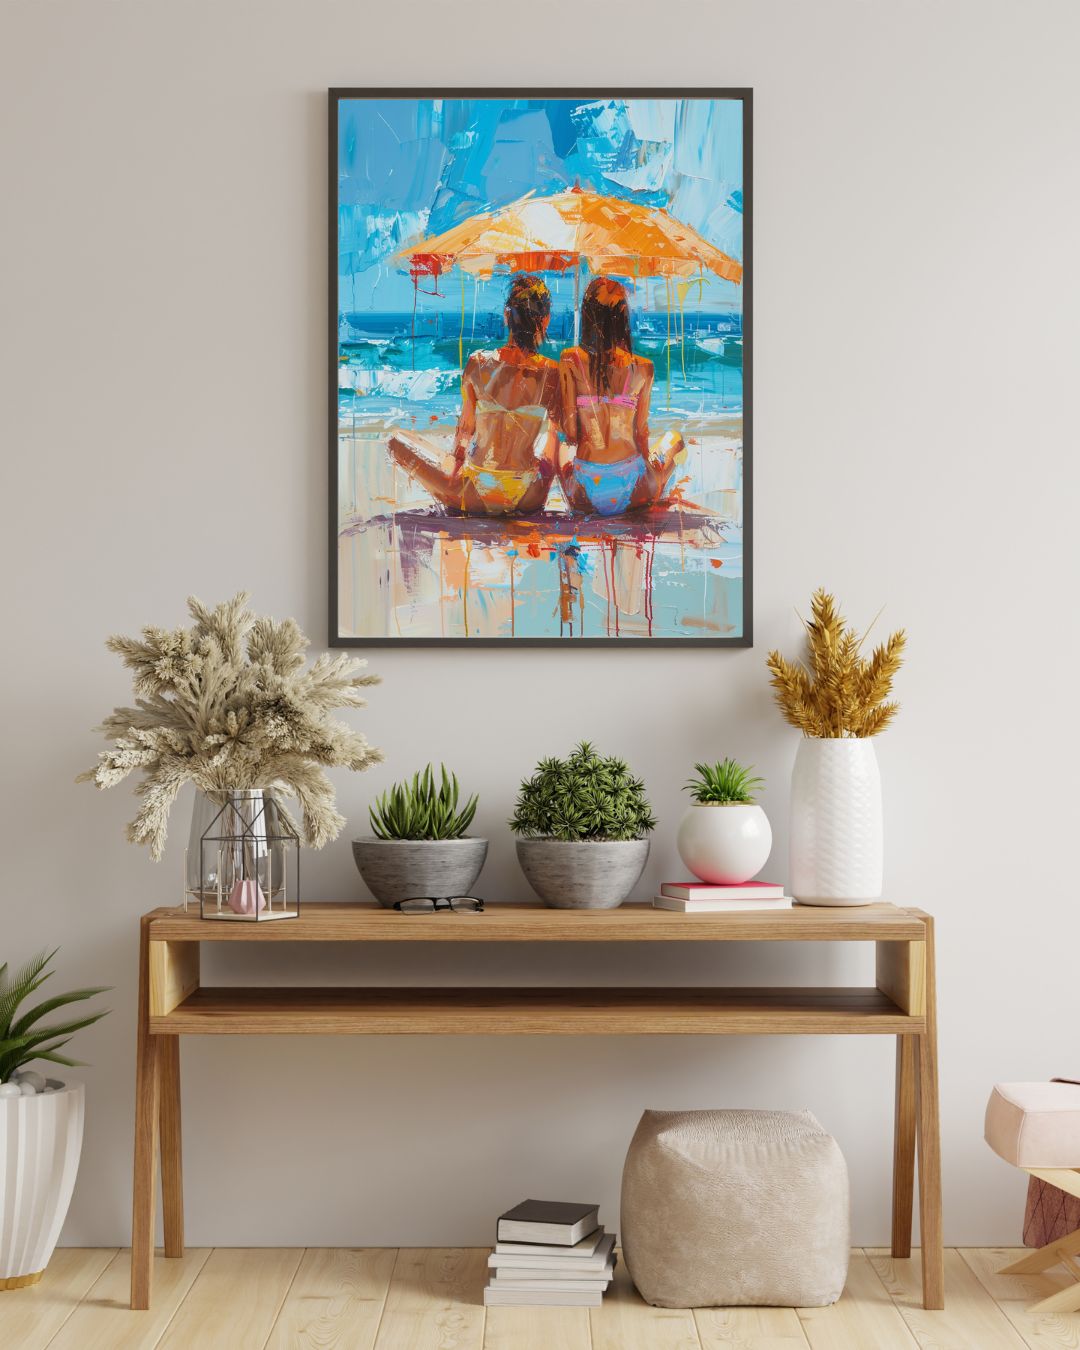 Best Friends at the Beach Poster